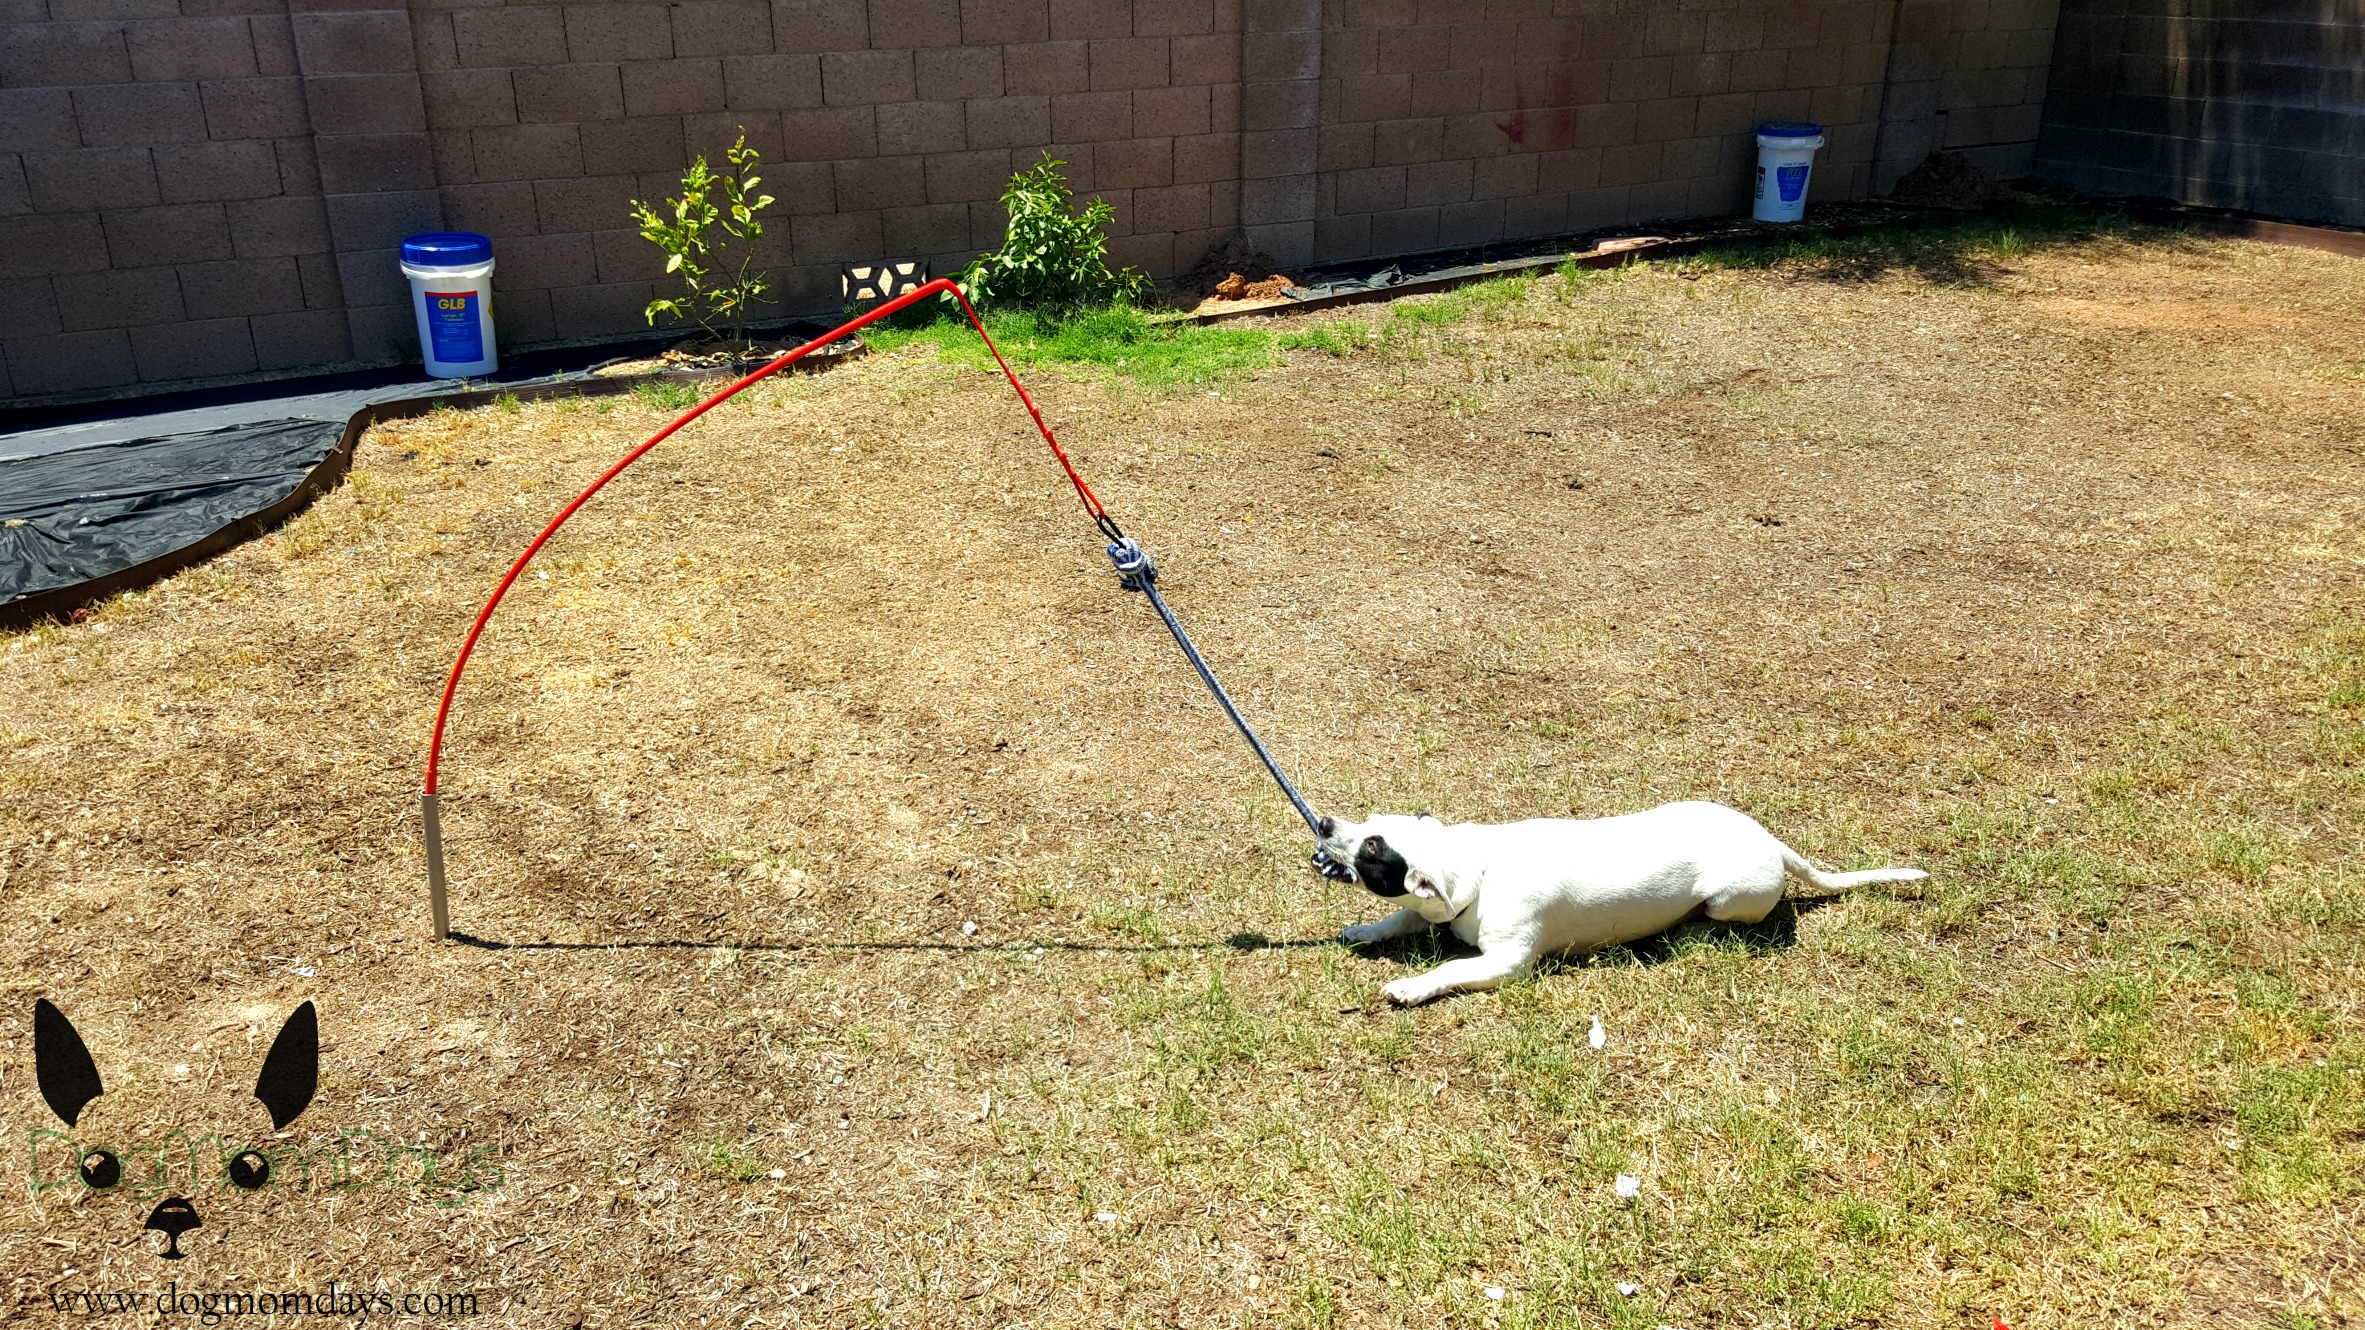 Have an energetic dog with high toy drive? Tether Tug is for them